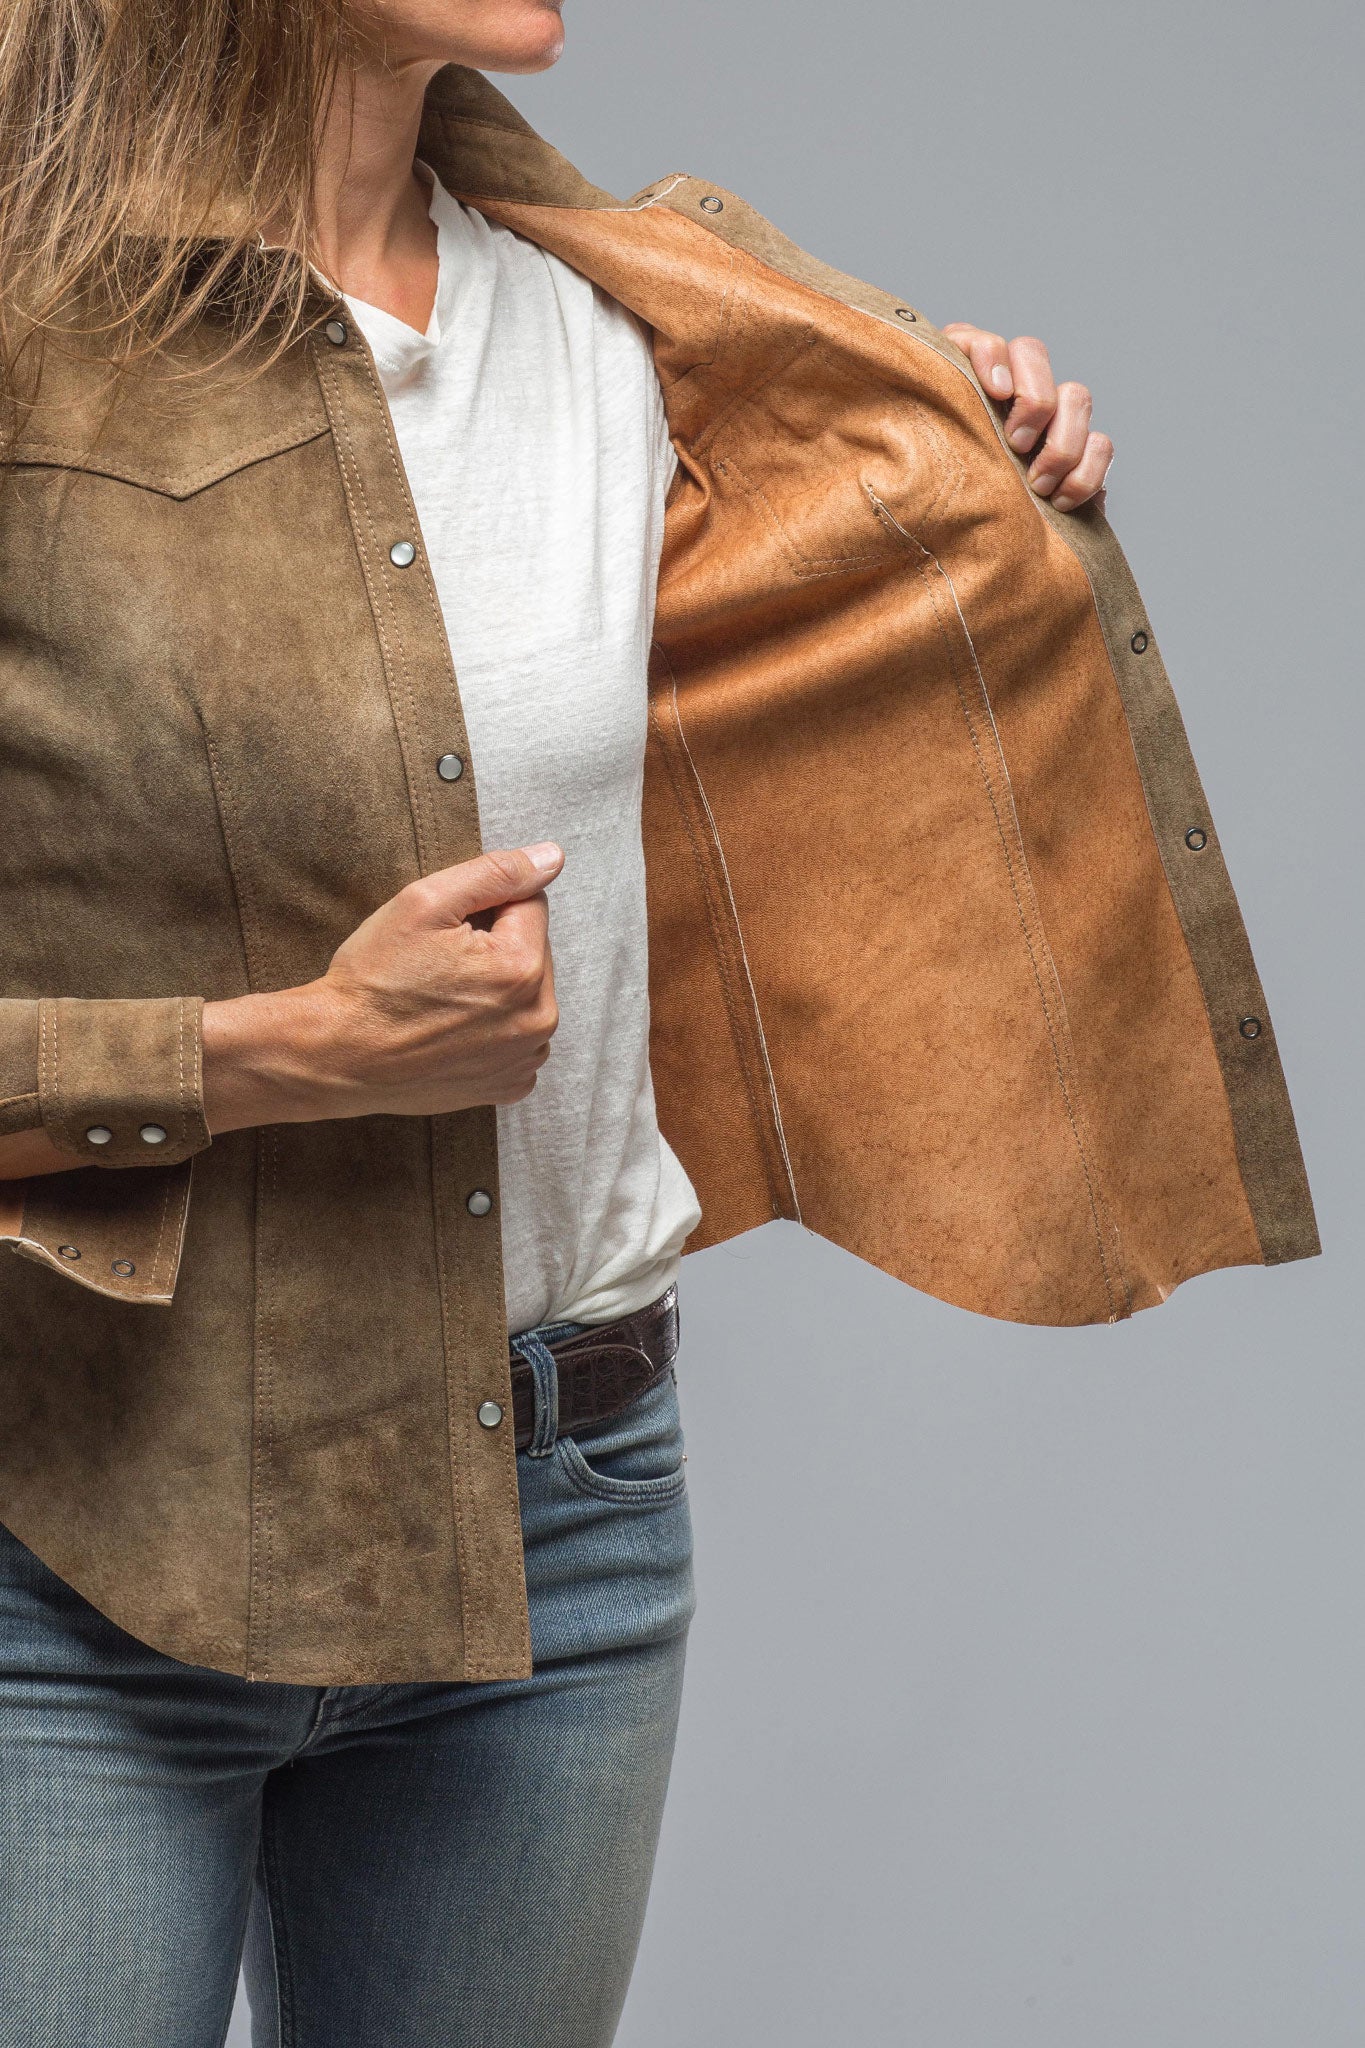 Pipa Leather Western Snap Shirt | Ladies - Outerwear - Leather | Roncarati